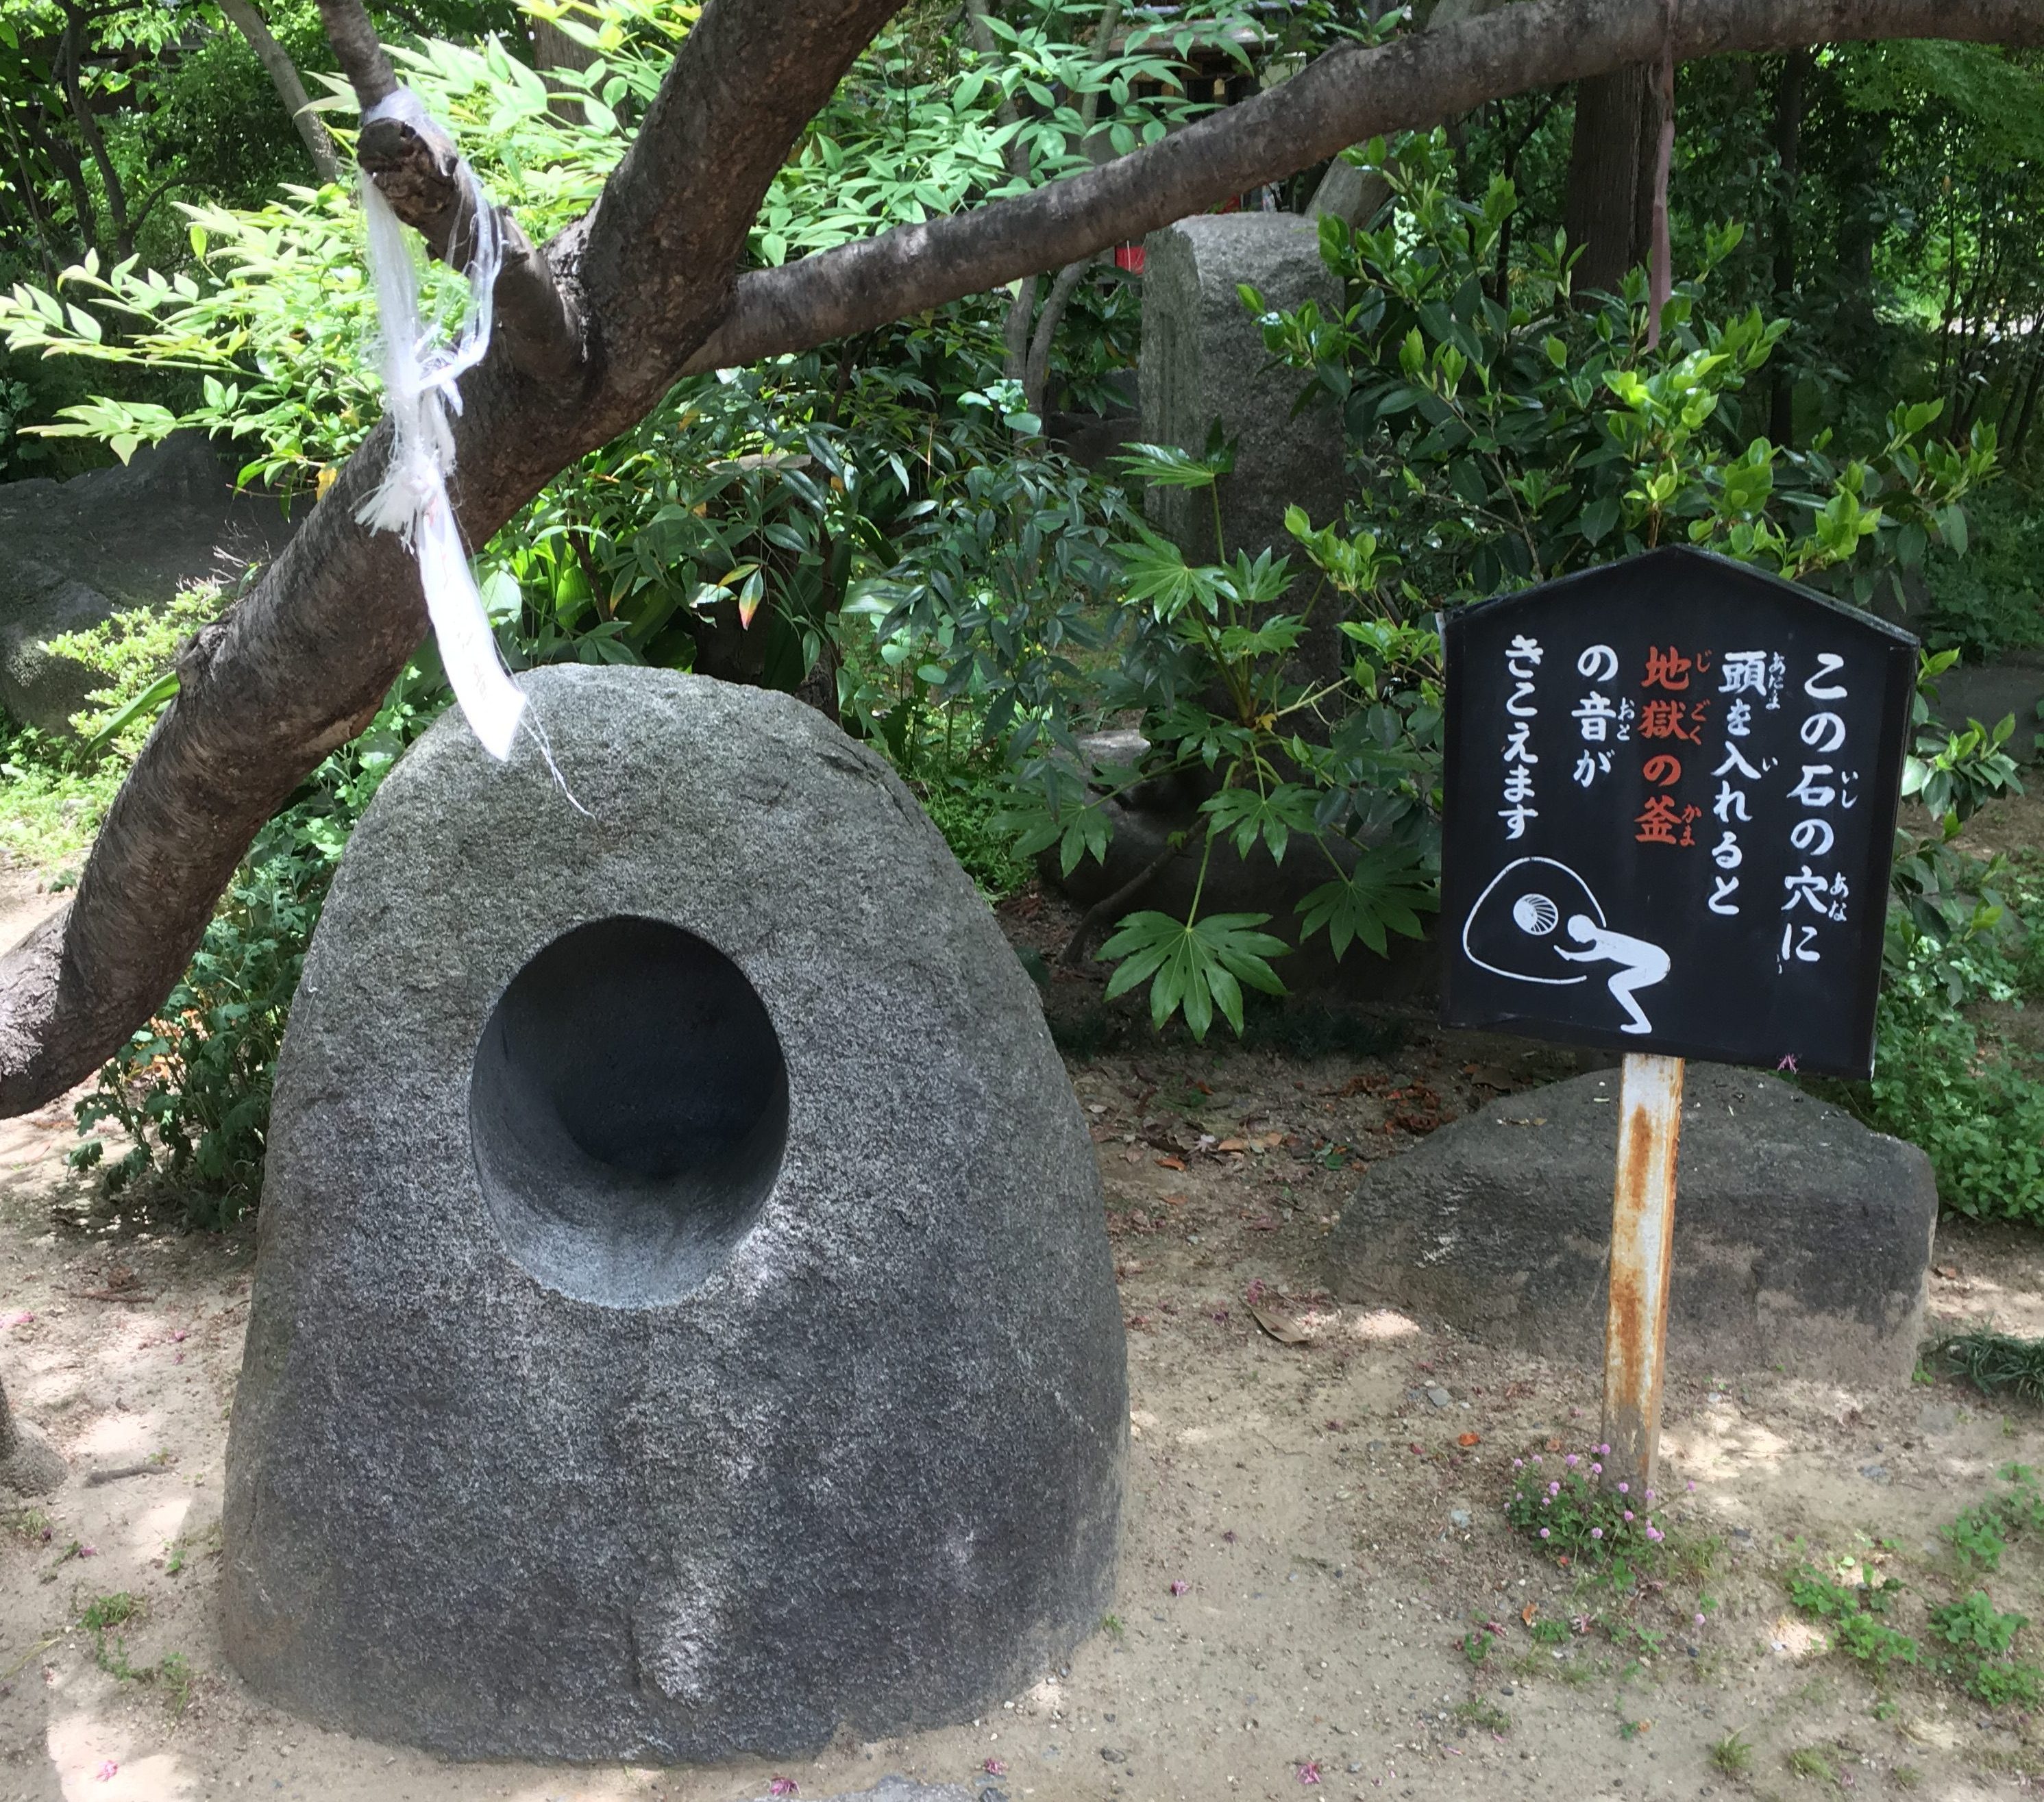 large stone with a large hole in the middle of it at Senko-ji temple surrounded by foilage